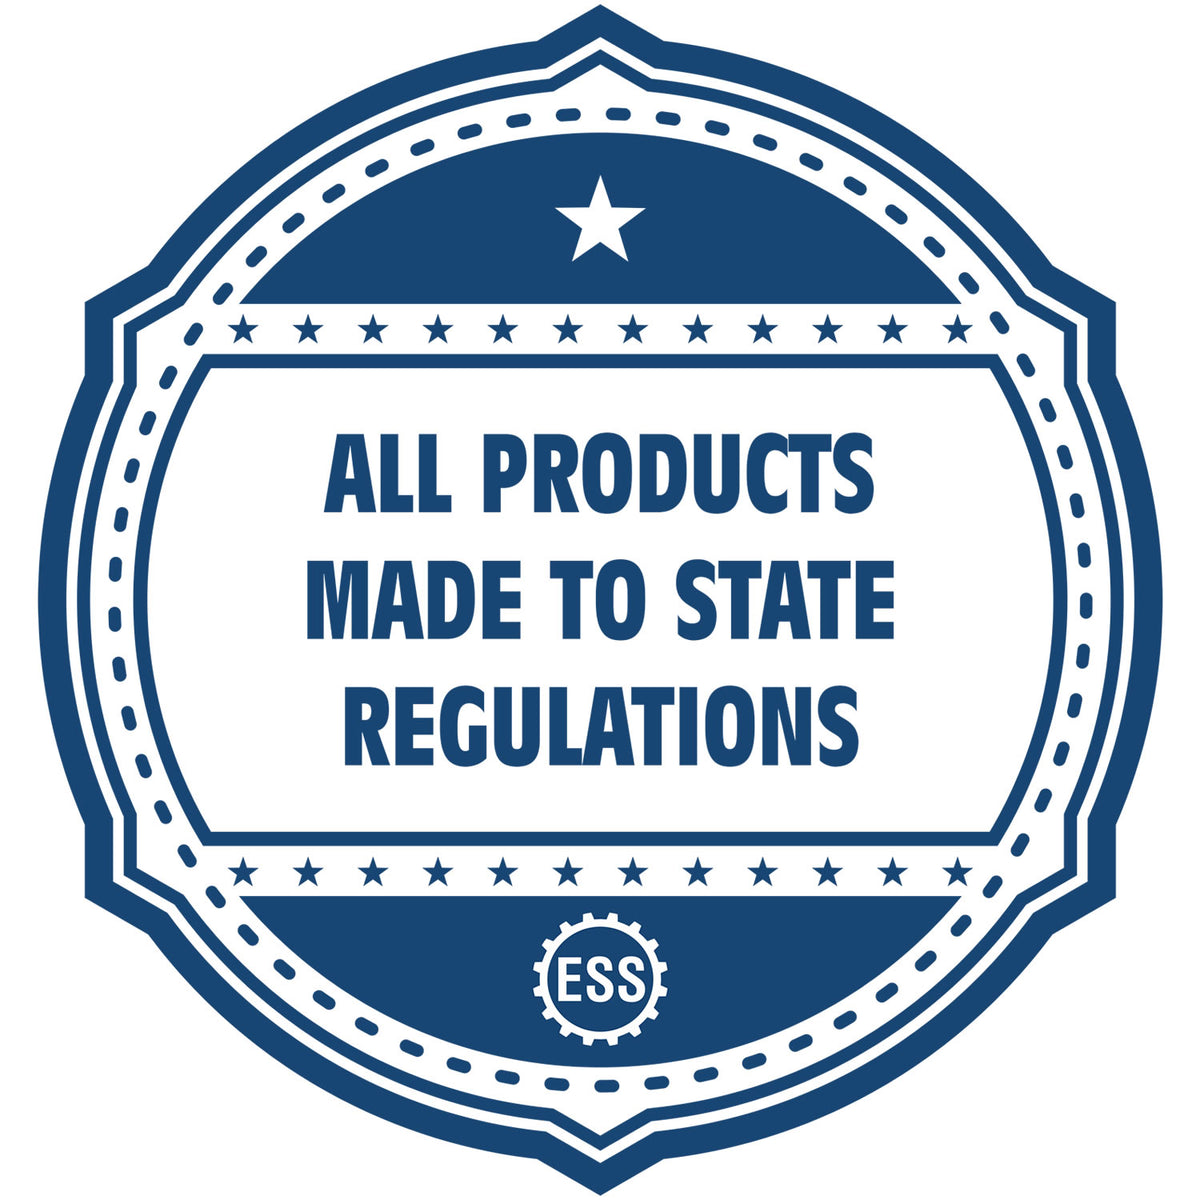 An icon or badge element for the Heavy-Duty Maryland Rectangular Notary Stamp showing that this product is made in compliance with state regulations.